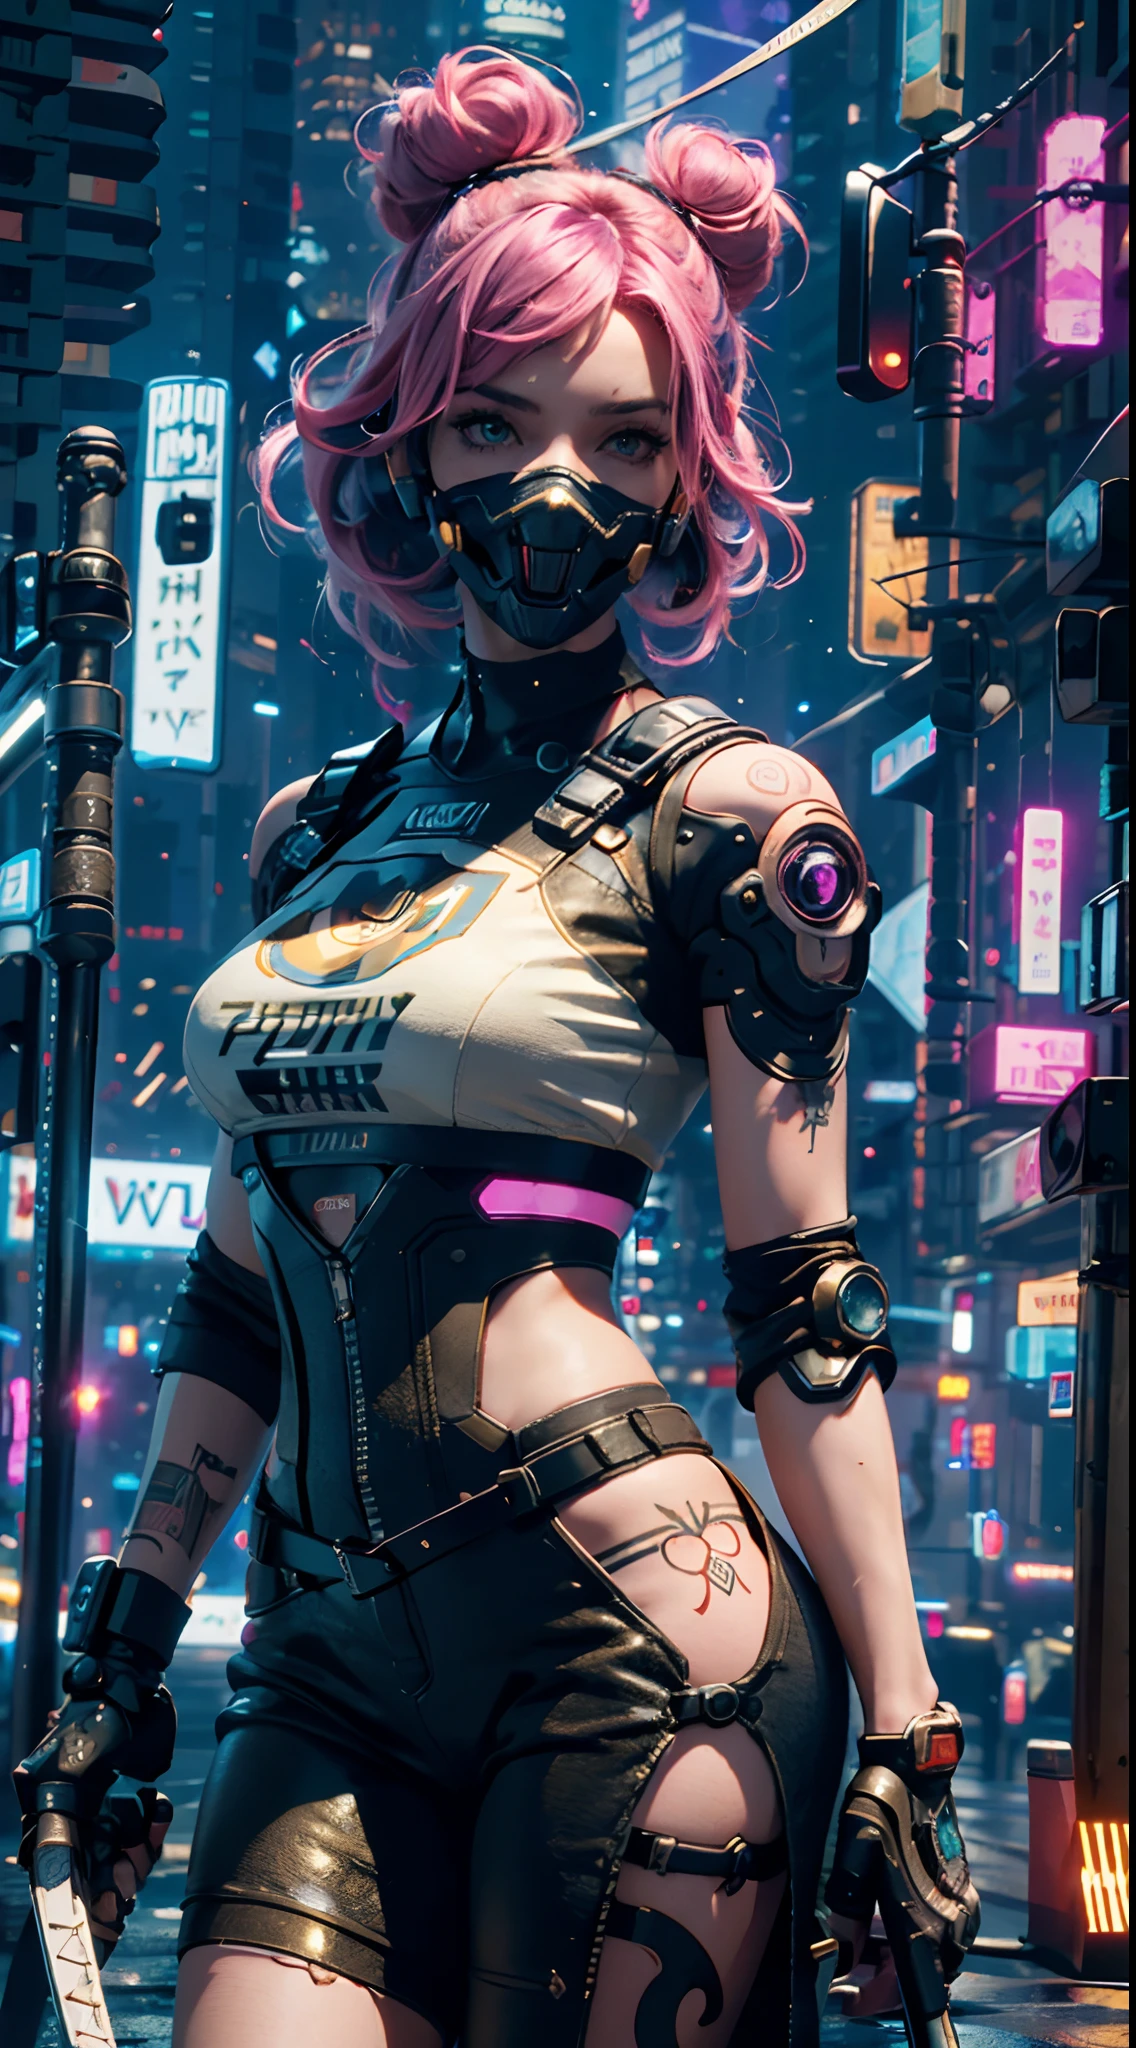 masterpiece, maximum quality,CG art,RTX 4090,best quality,4K,1080p,realistic,CG wallpaper,super high detailed,ultra high resolution, 8k, cyberpunk2077,Blade runner 2049,a woman,beauty,21years old,fair skin, extremely beautiful,strong gaze, alone,portrait,((close-up face)),cyberpunk outfit, extremely detailed face, detailed eyes,mischievous smile, cheerful, realistic photo, totally realistic, human pelle, studio lighting,golden ratio body, wide hips,perfect legs, big ass,pink hair,curly hair,double buns,blunt bangs,white clothing,D-cup breasts,in the rooftop of cyberpunk city,cyberpunk city background,((night)),rain,tattoos,Combat posture,((cyborg)),((Mechanical mask)),holding a katana